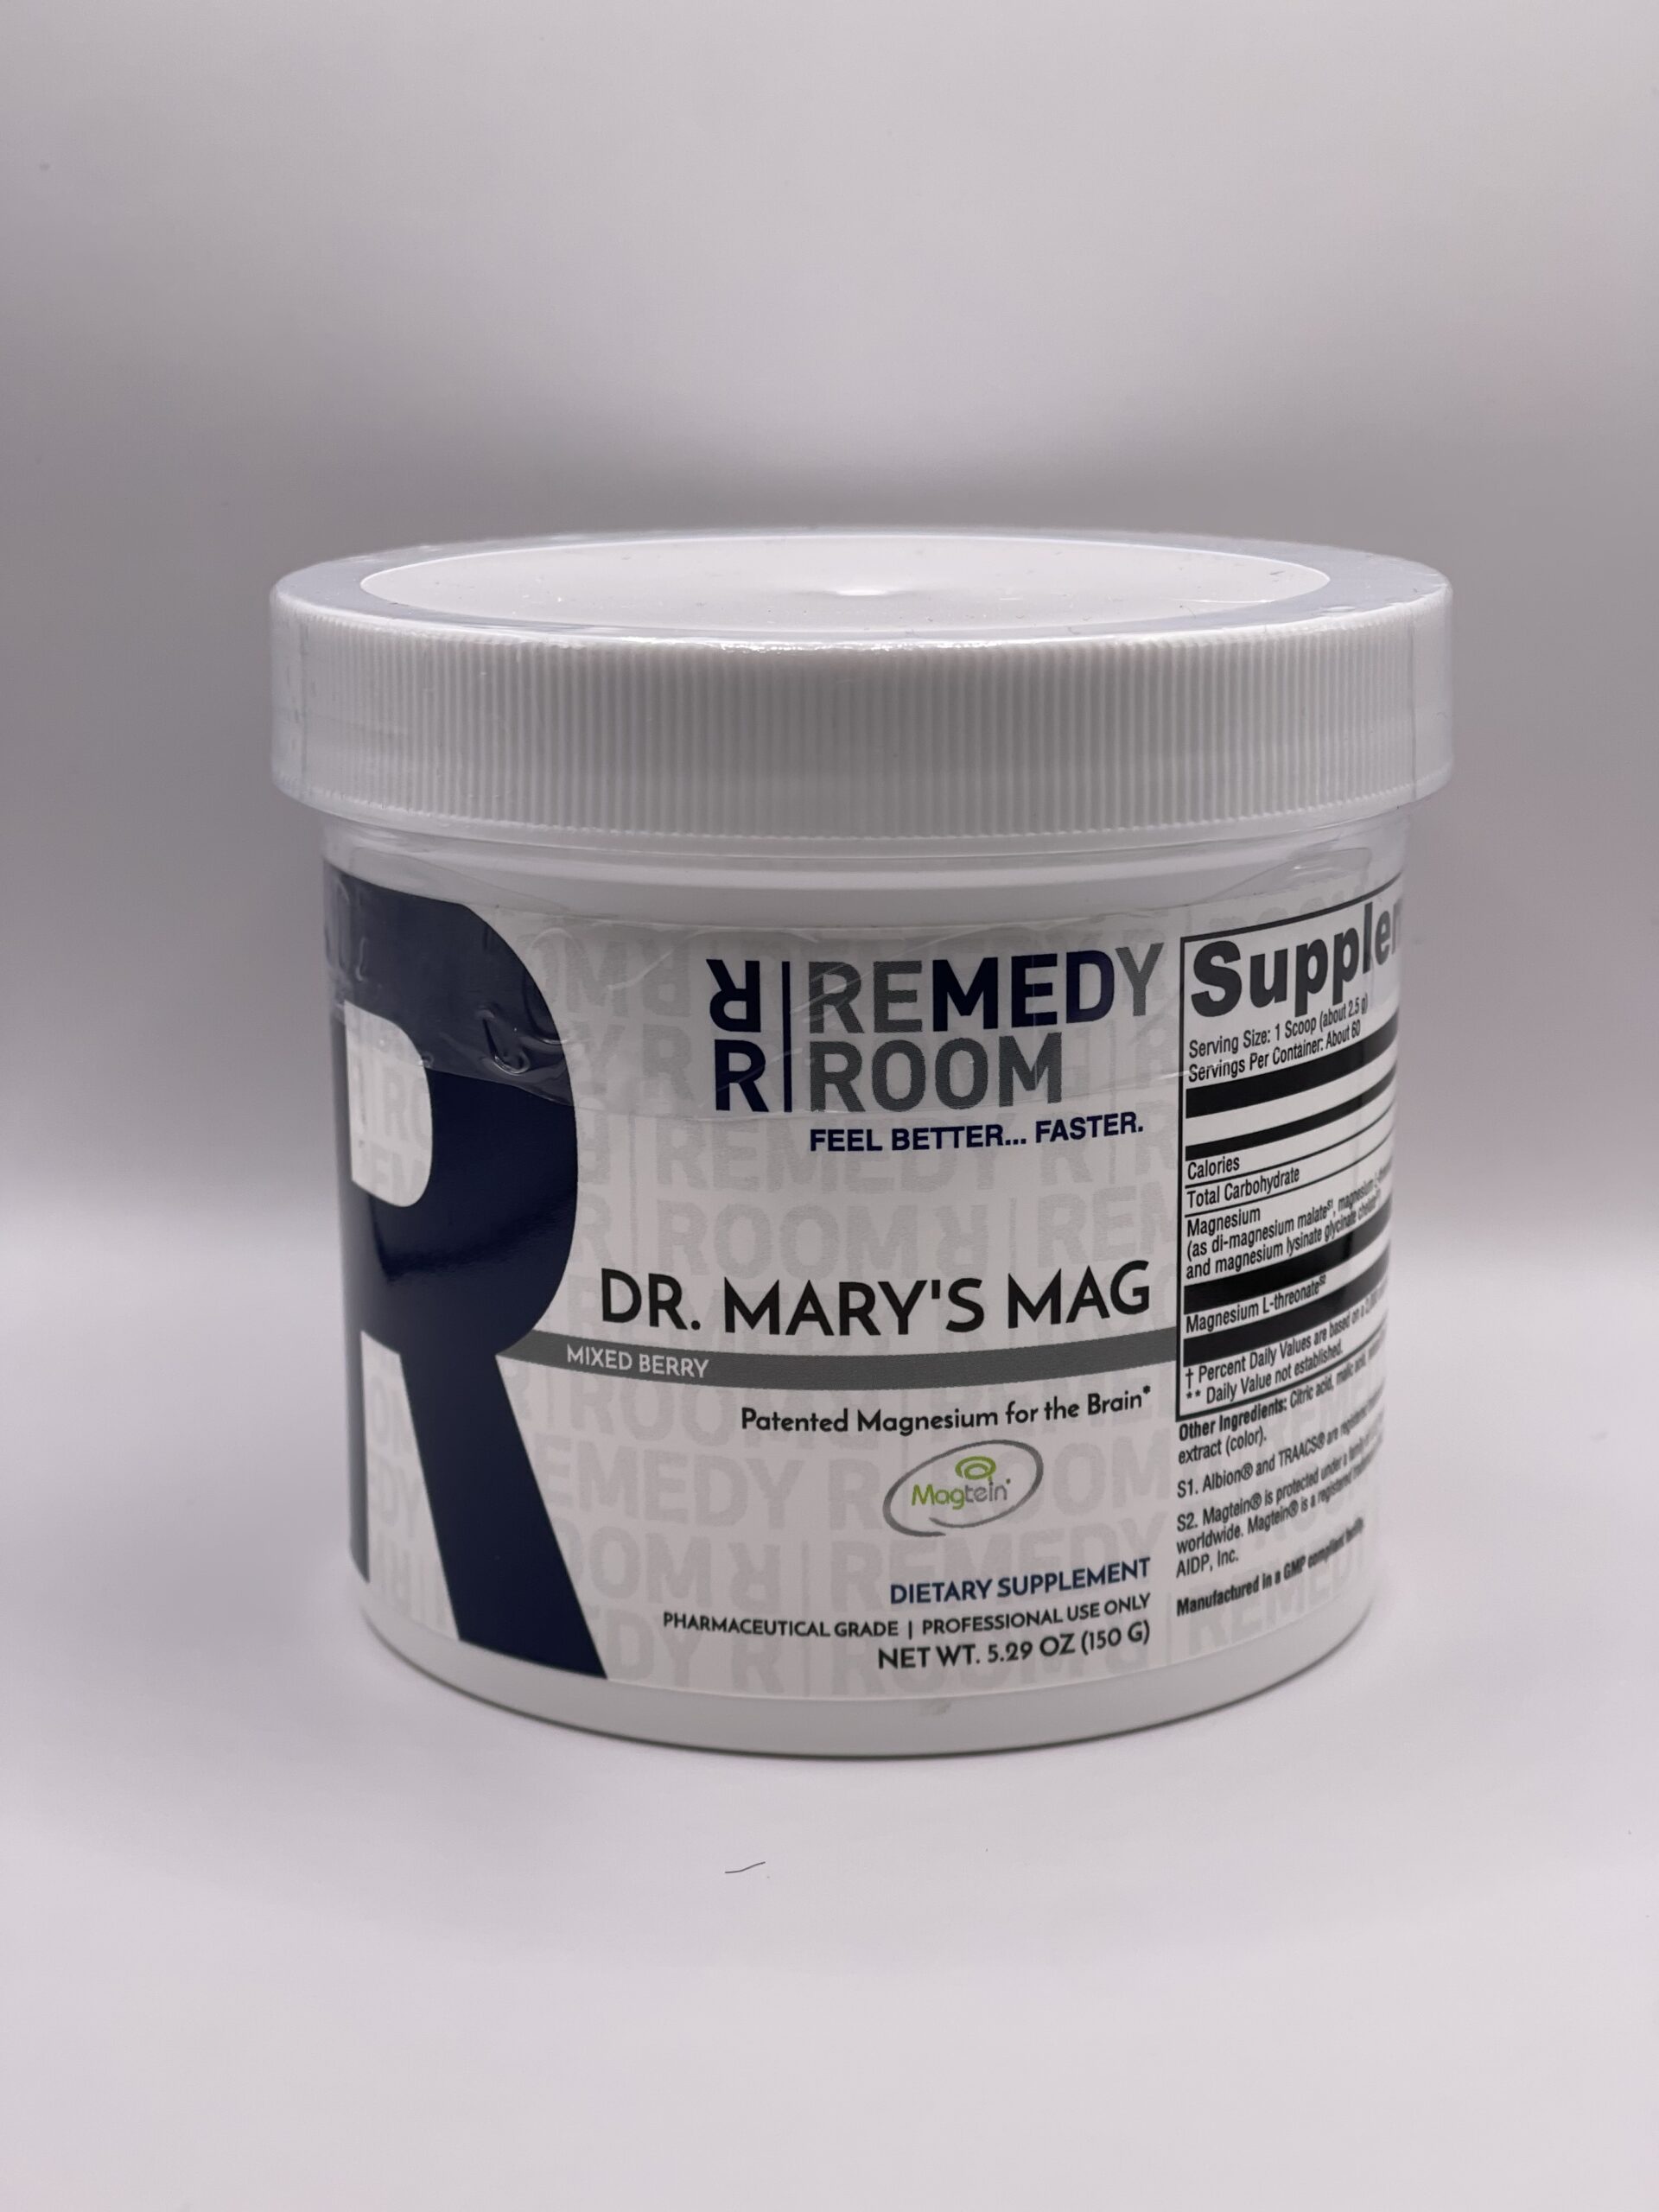 Dr. Mary's Mag